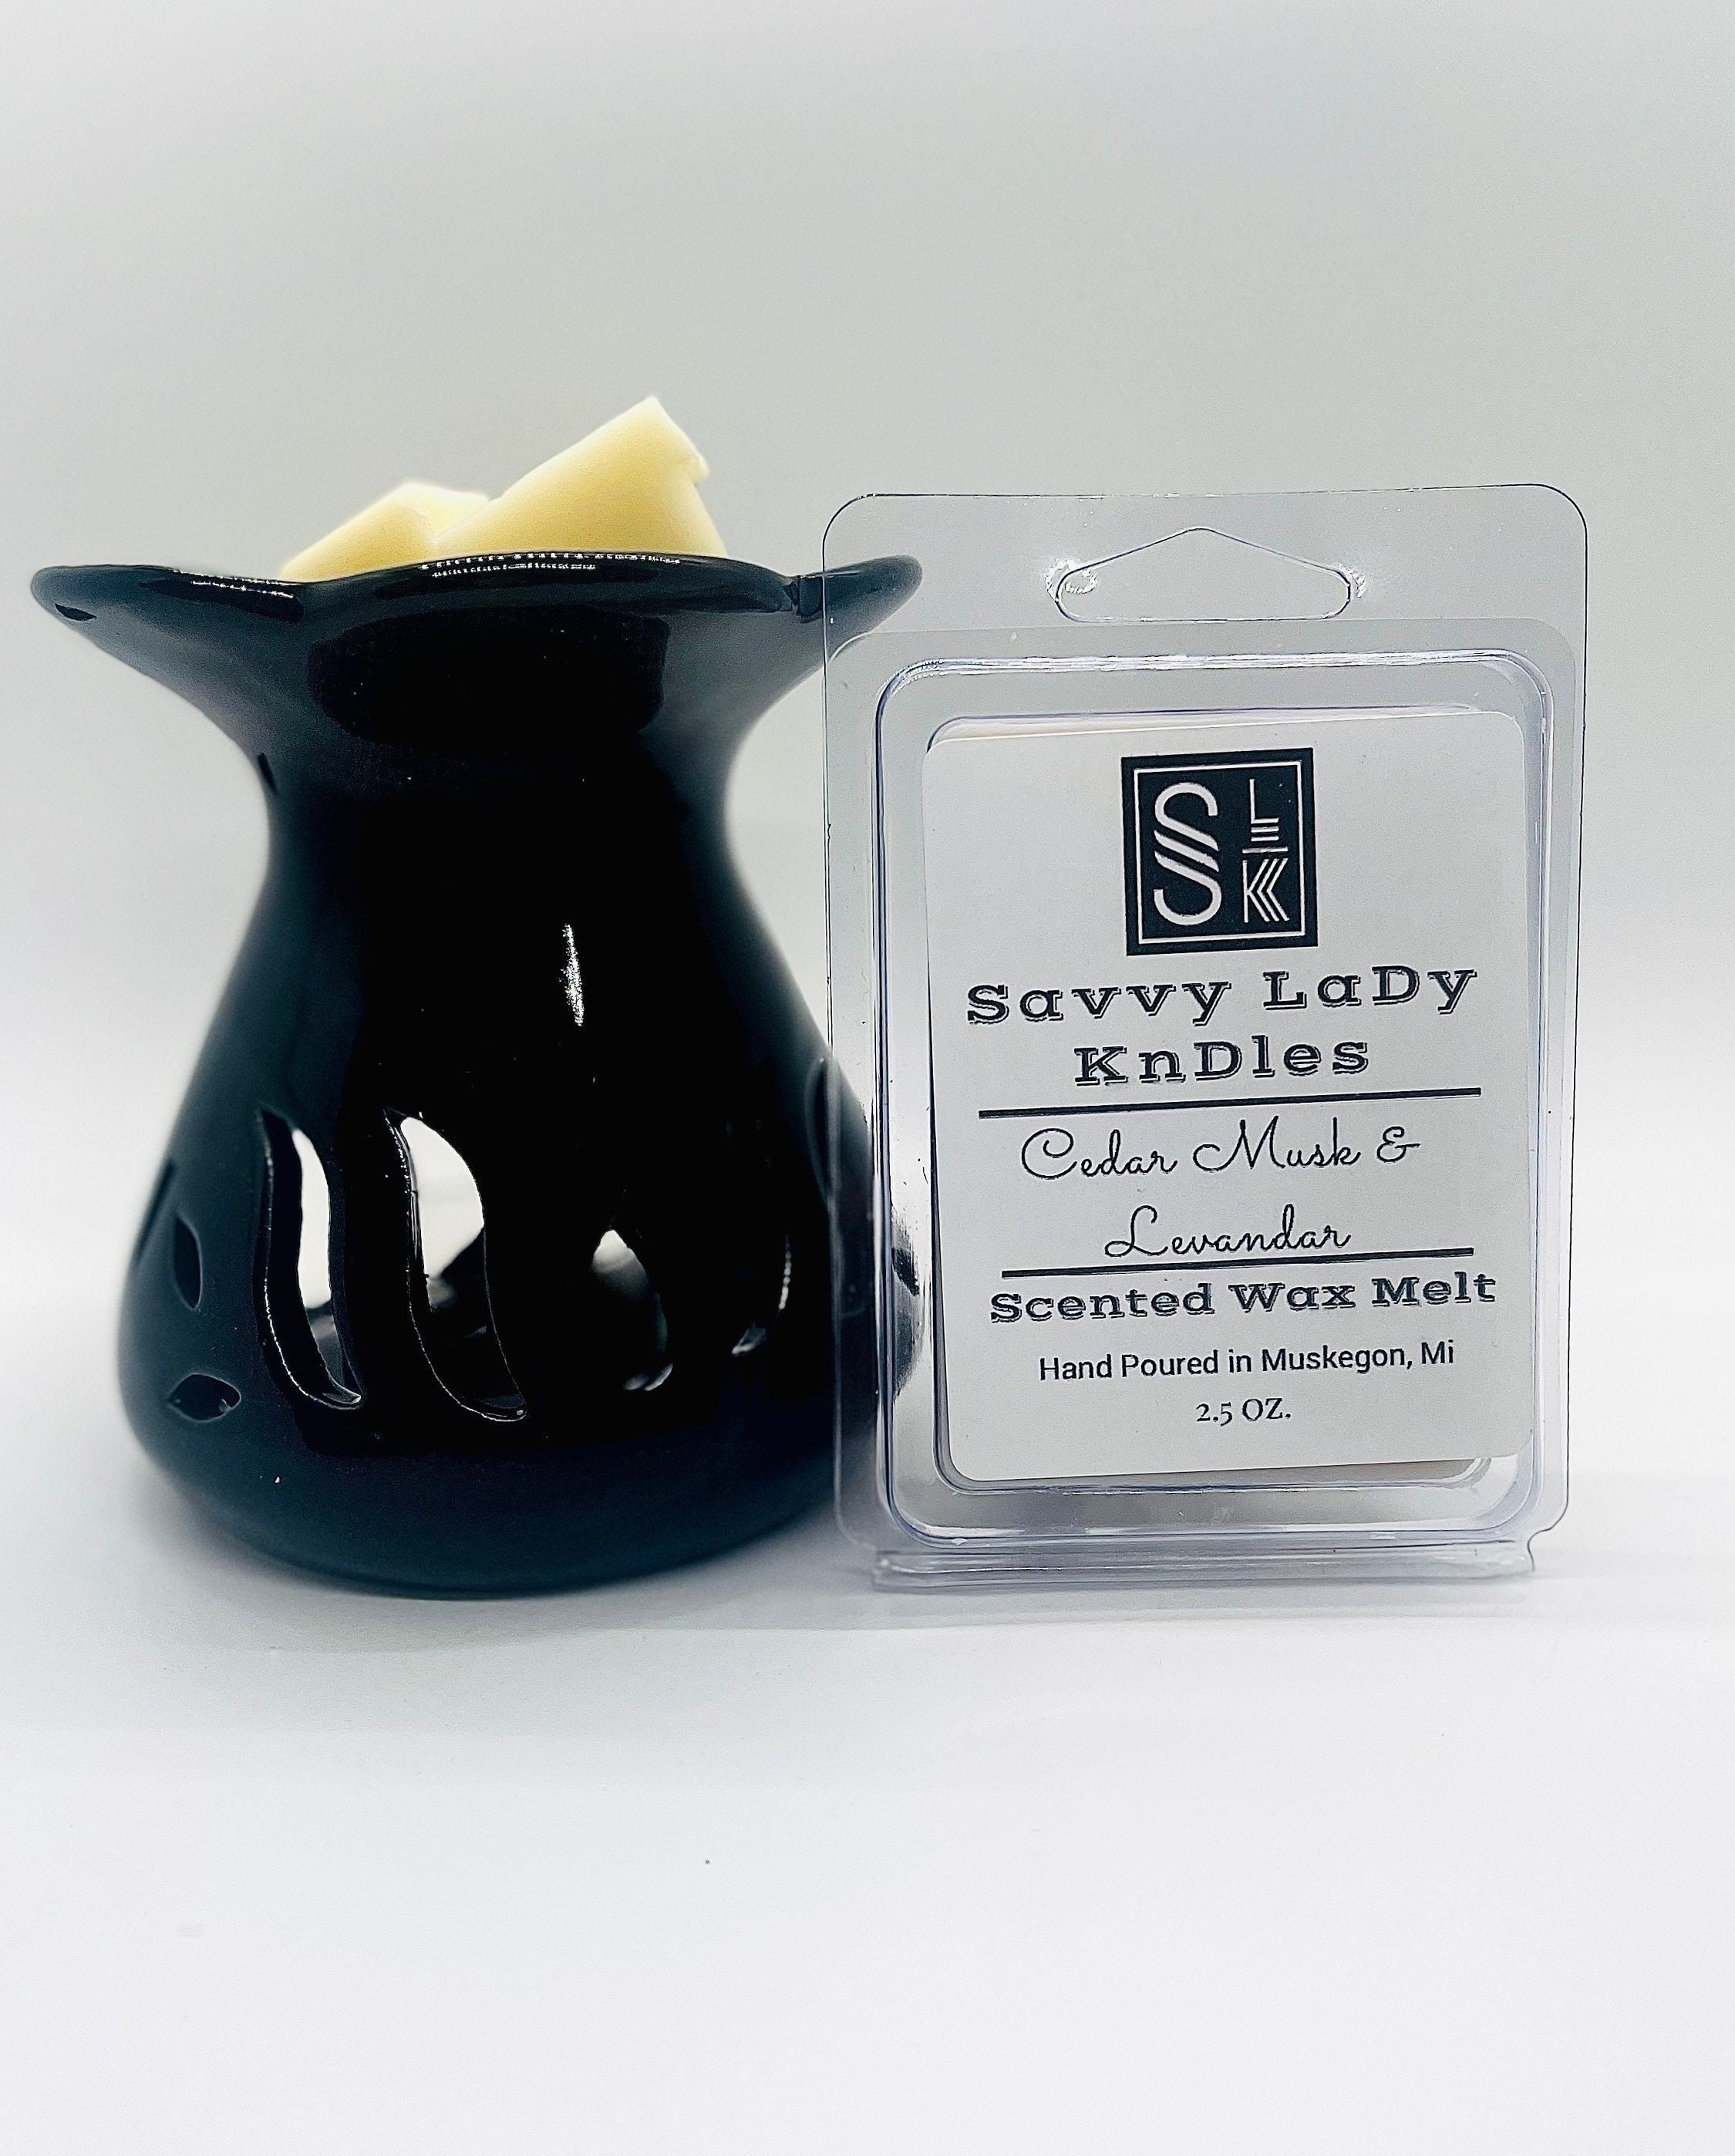 Soy Wax Melts for Warmer, All Natural Wax Melts for Women and Men, Food  Scented Wax Melts, Wax Tarts for Home Fragrance.